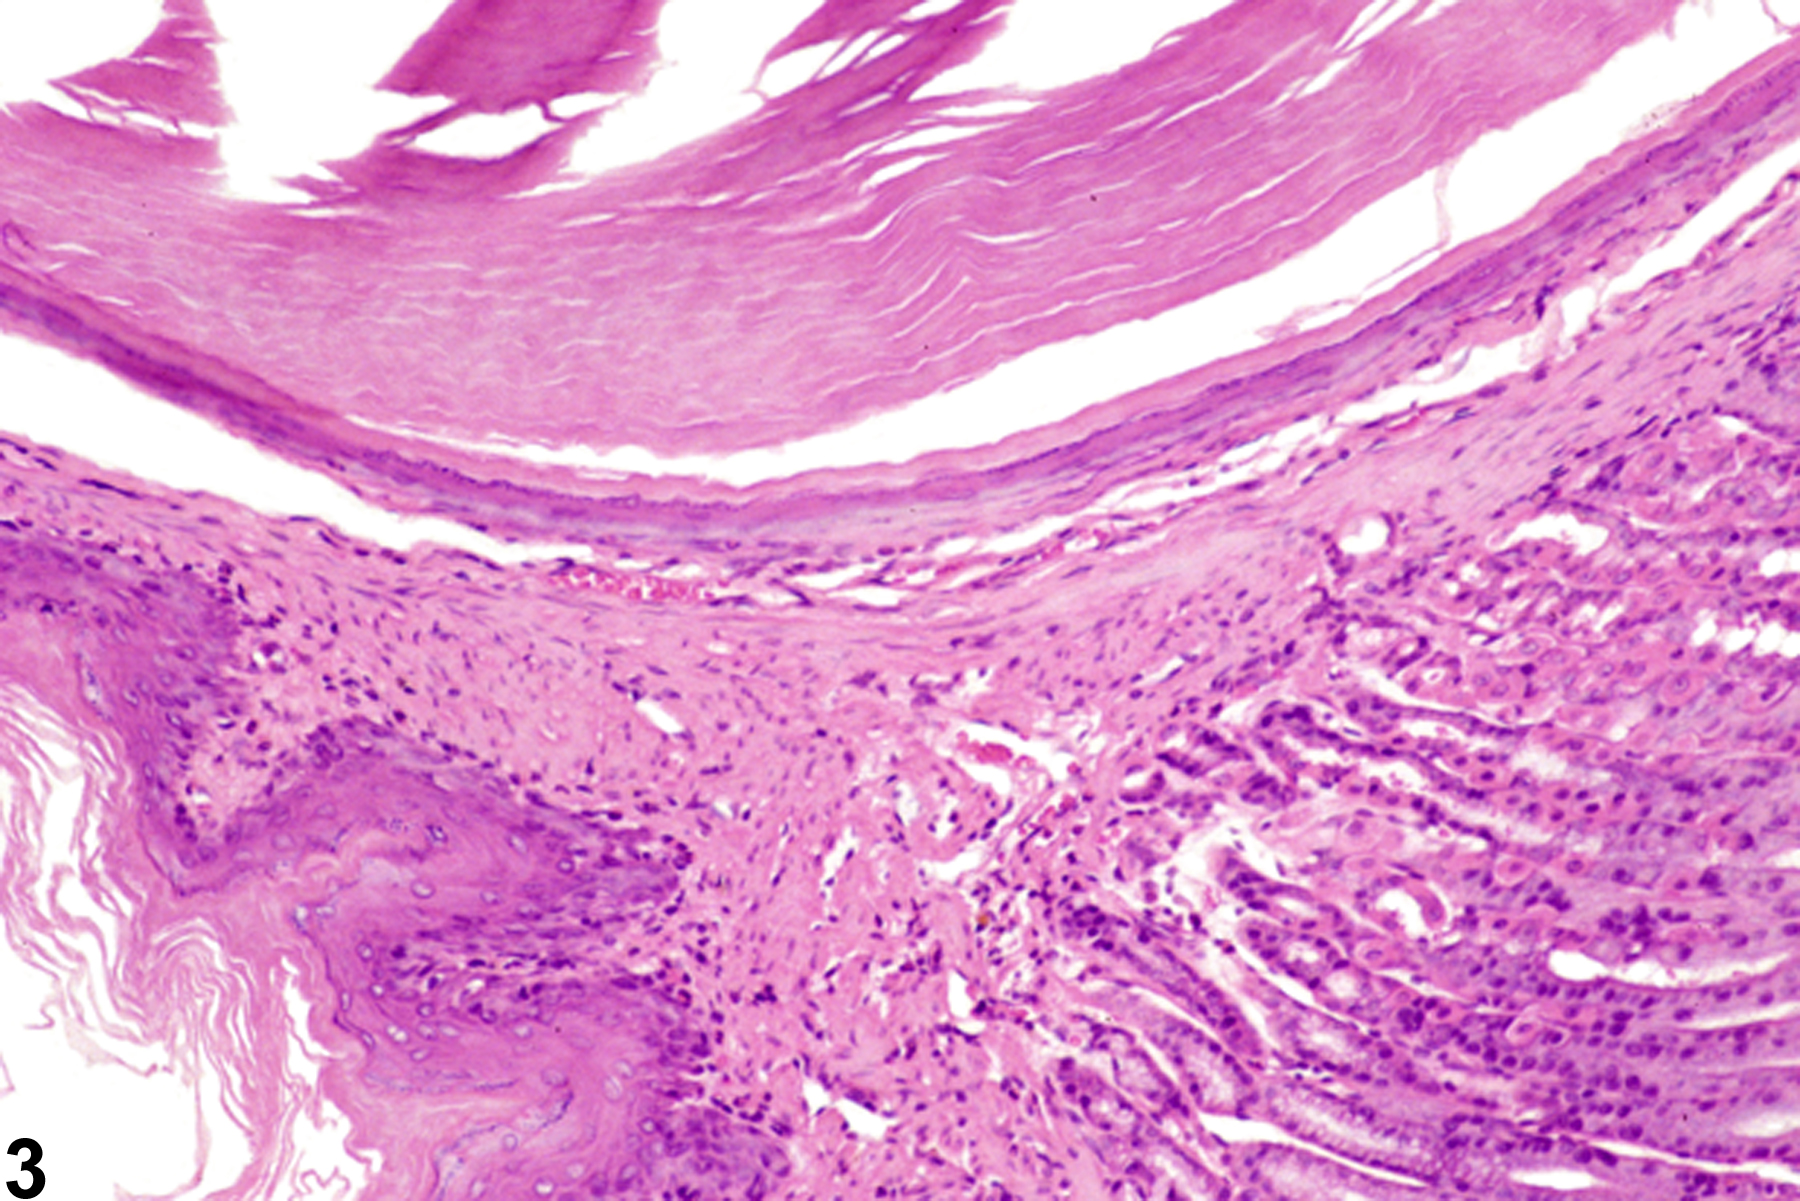 Image of cyst in the forestomach from a female F344/N rat in a chronic study